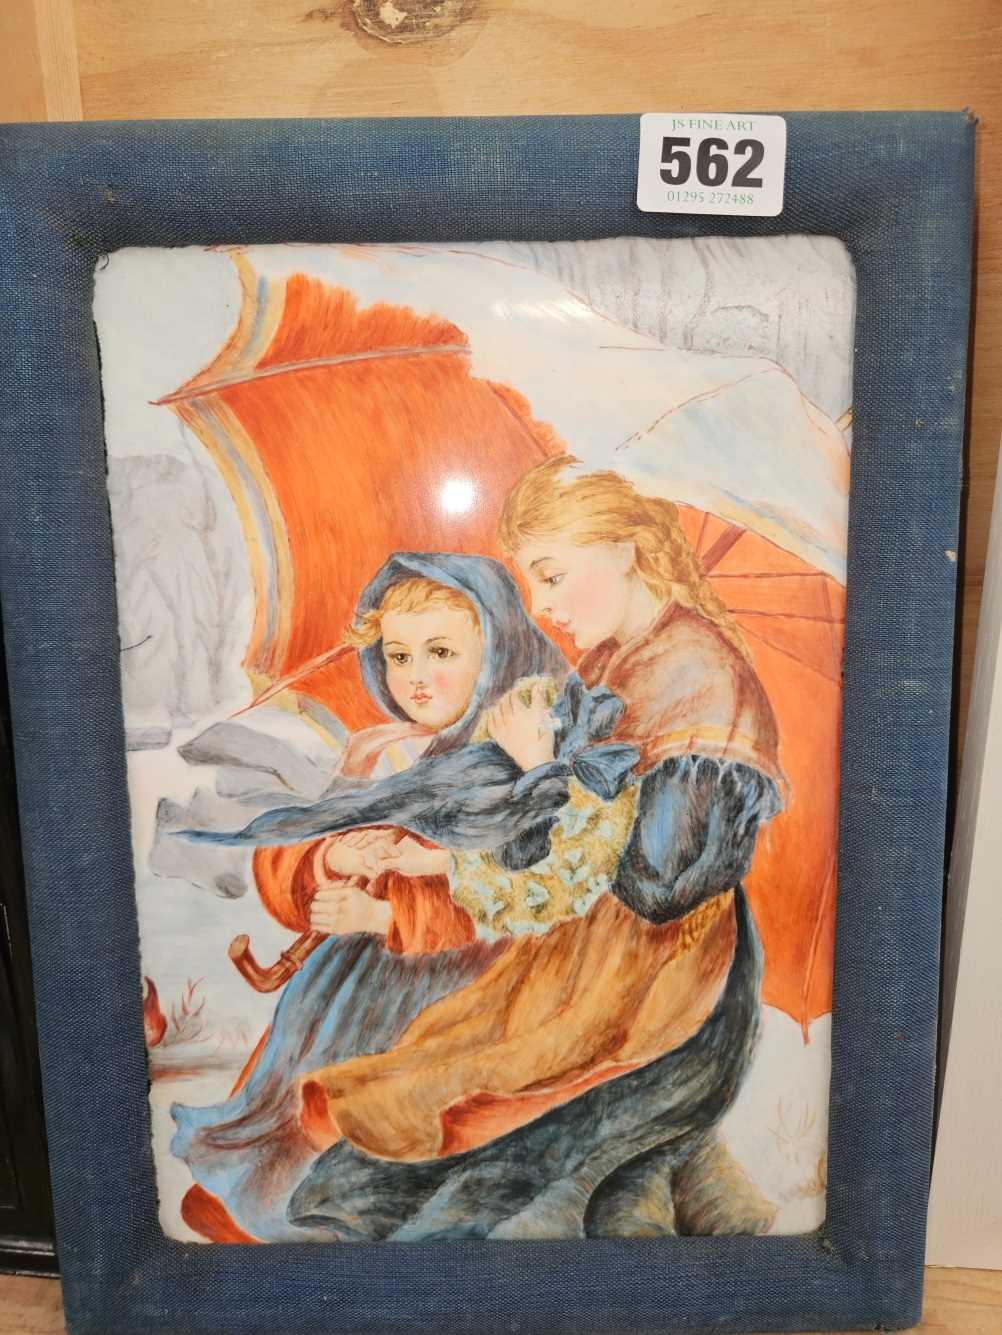 A CONTINENTAL SCHOOL PAINTING ON PORCELAIN OF TWO CHILDREN IN THE SNOW, 17 x 24.5cm.